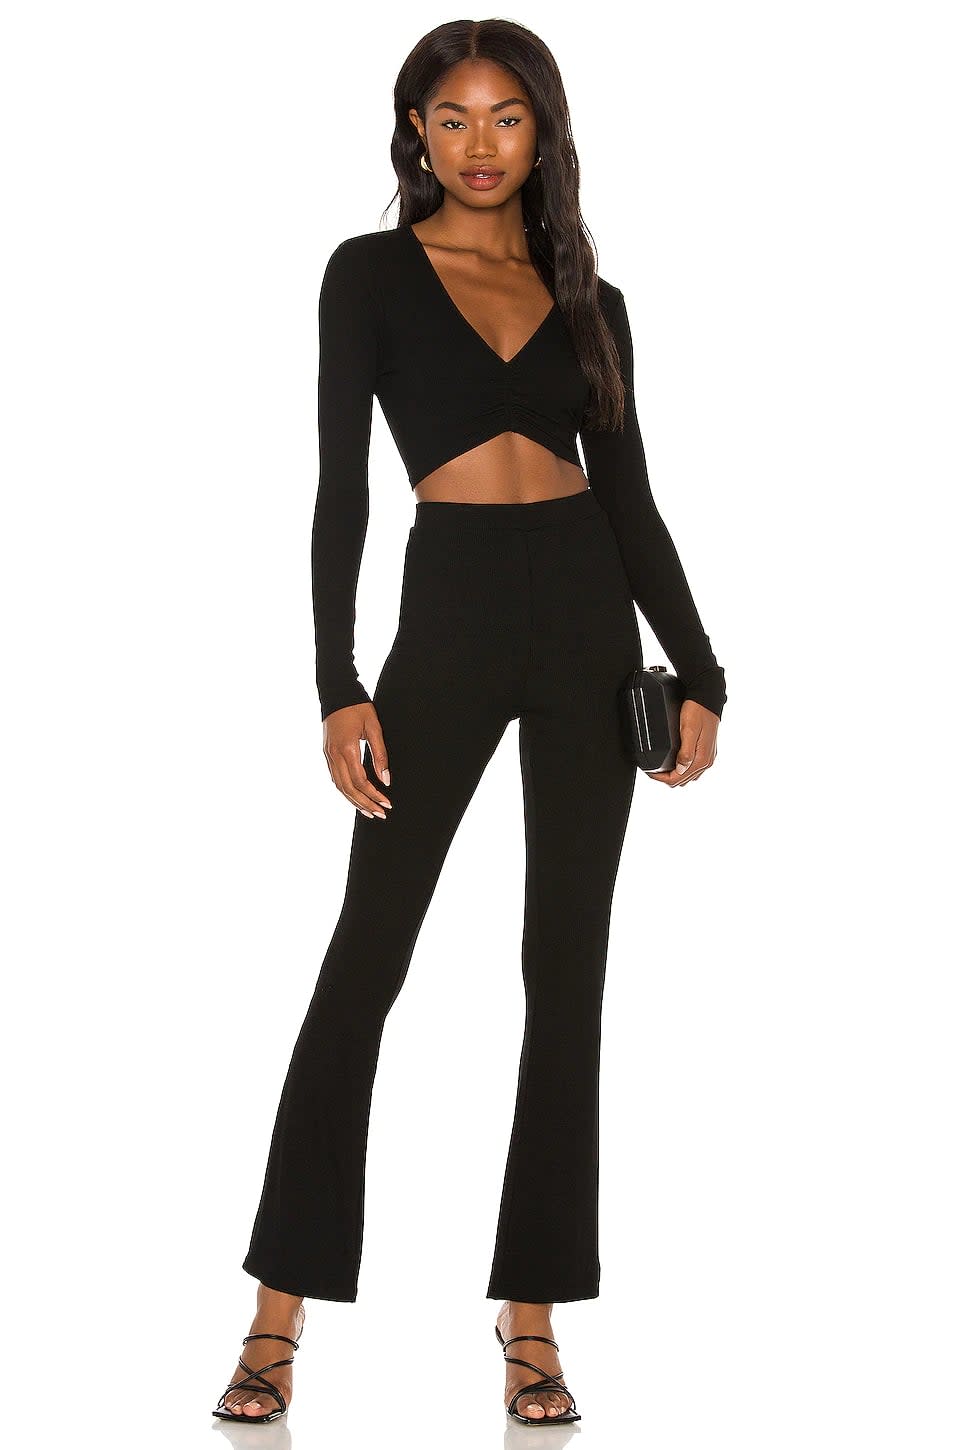 <p>This fun <span>Superdown Mandy Pant Set</span> ($83, originally $92) is a great option for going out or spending the day with friends. It's flattering and sexy, plus it's under $100!</p>